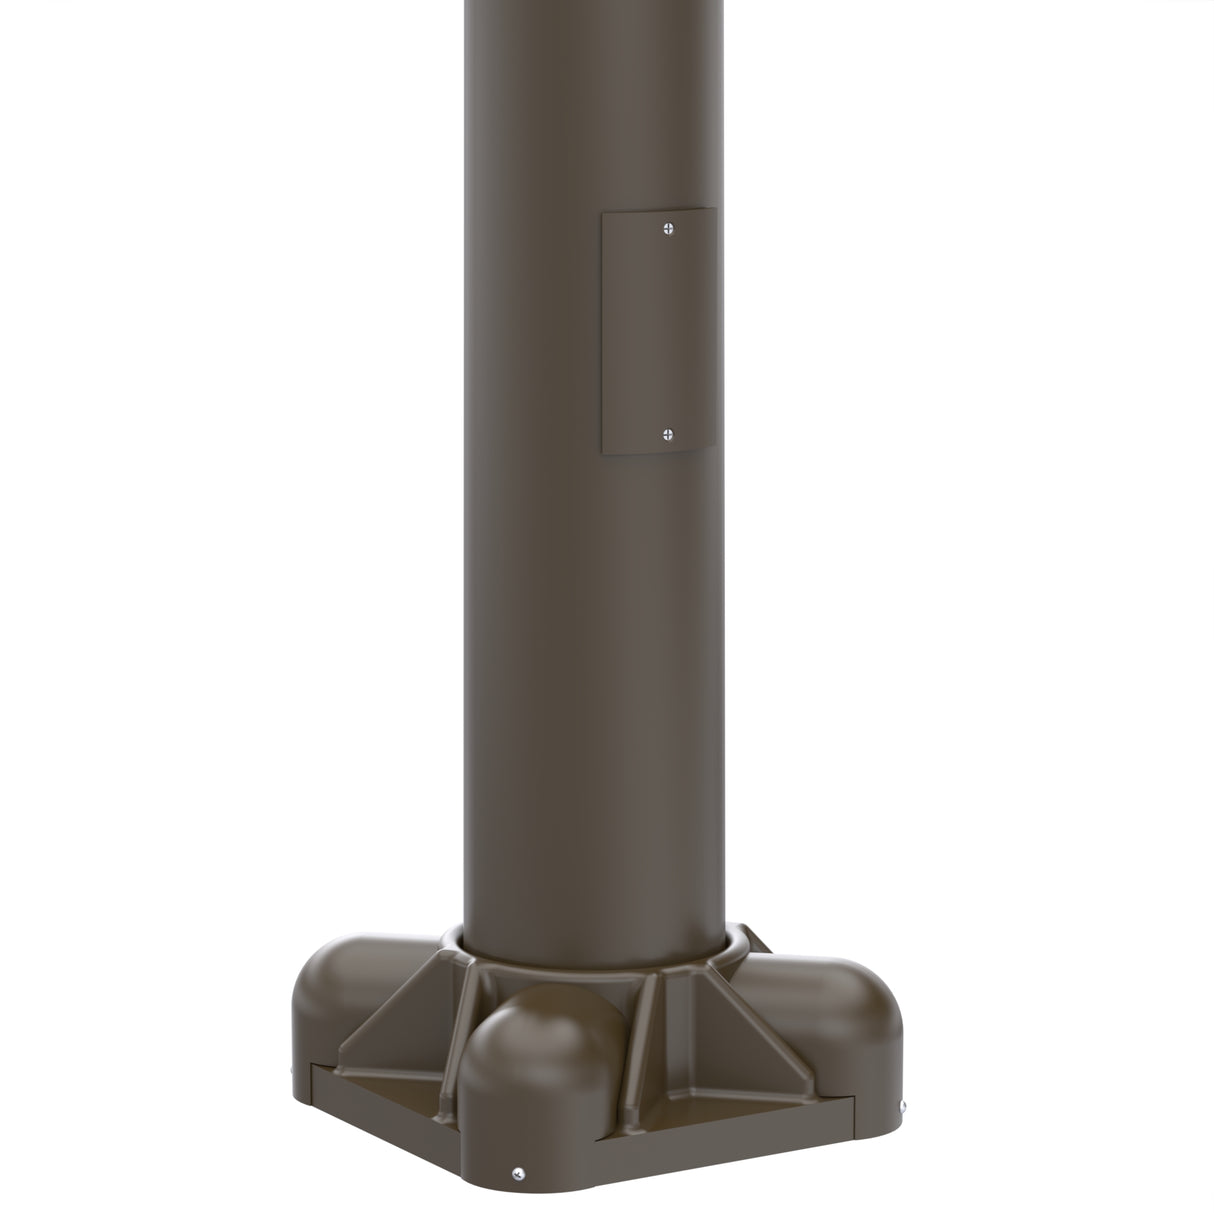 33' Tall x 8.0" Base OD x 4.5" Top OD x 0.250" Thick, Round Tapered Aluminum, Anchor Base Light Pole